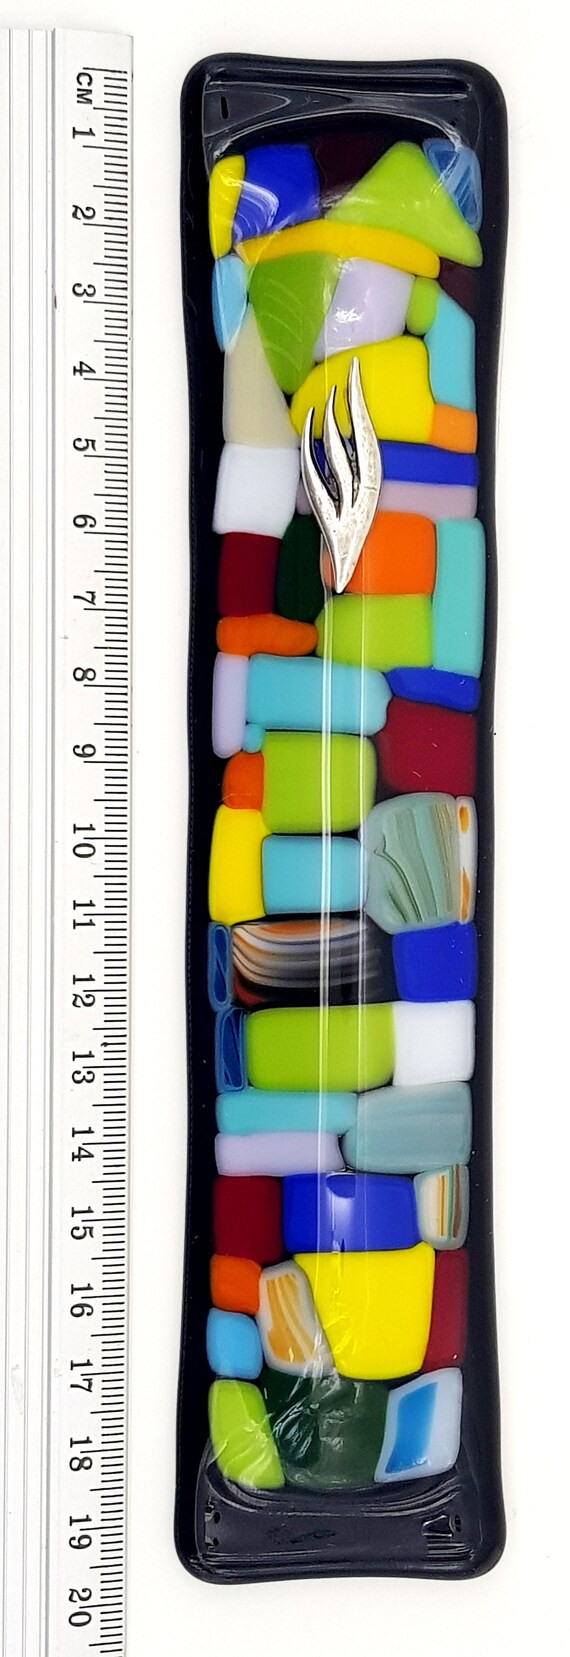 Unique Mezuzah Case Black Glass With Colorful Stains Jewish New Home Gift Handmade Judaica